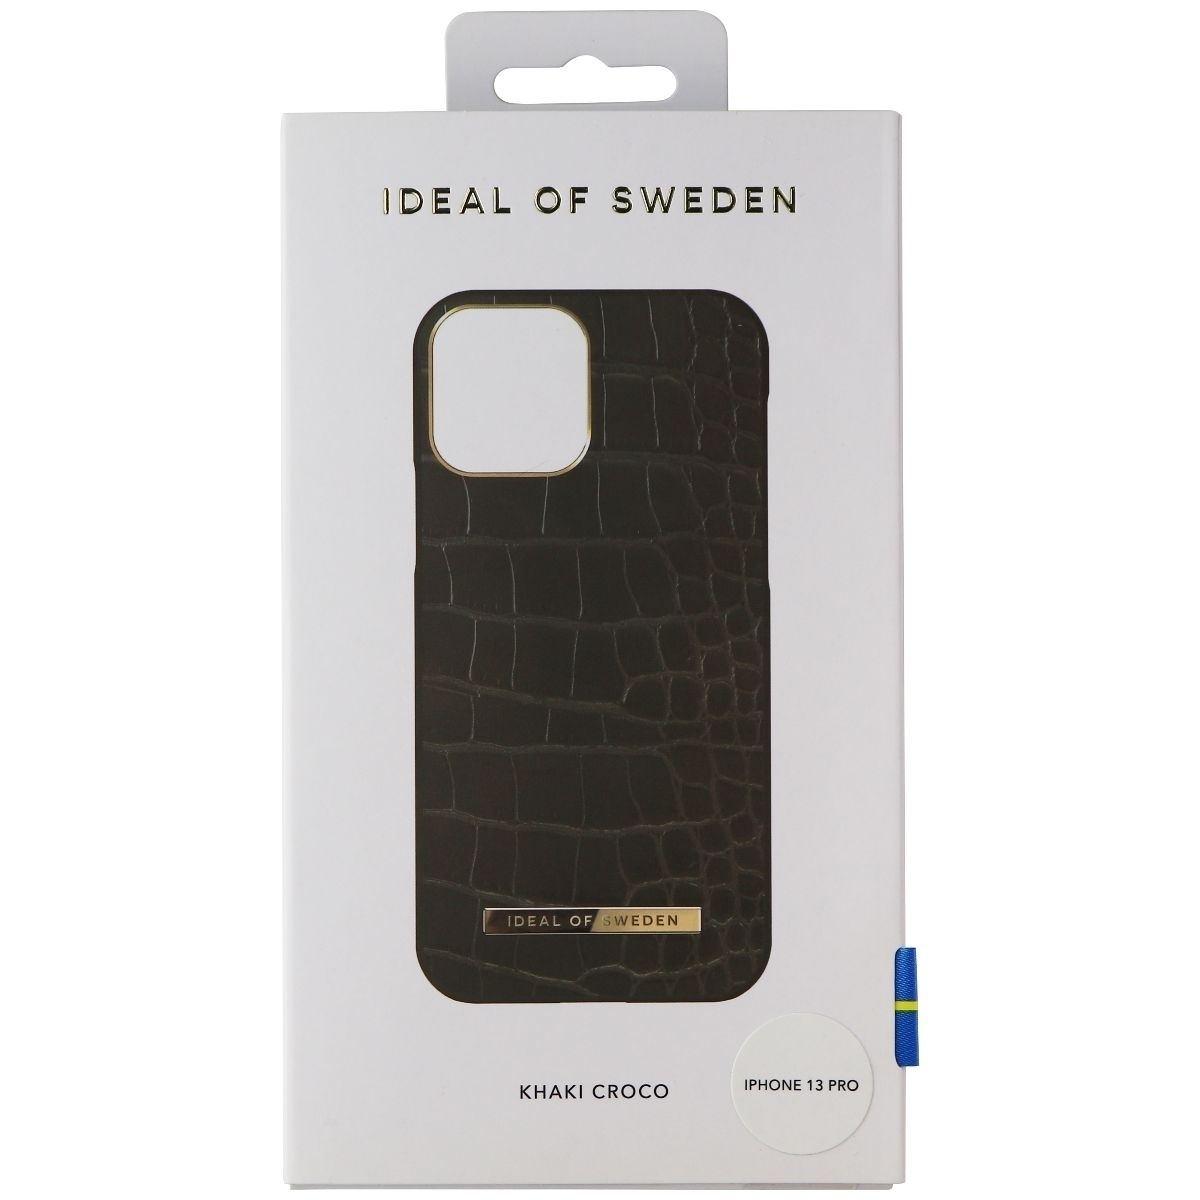 IDeal Of Sweden Atelier Case For IPhone 13 Pro - Khaki Croco